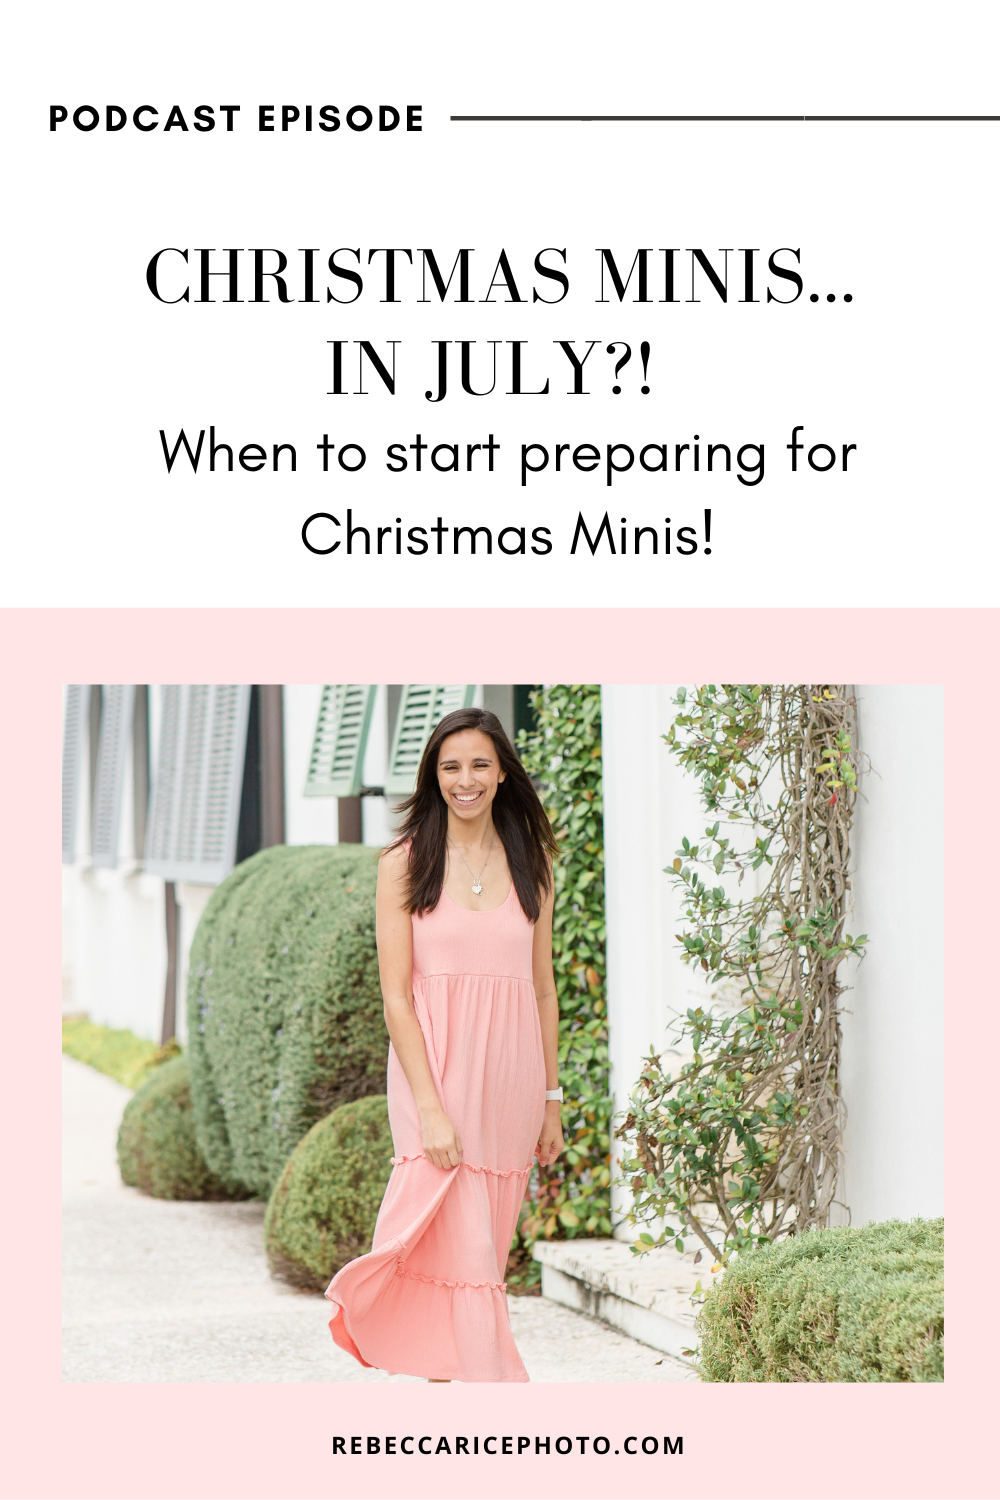 Christmas Minis in July?! When to start preparing for Christmas Minis!